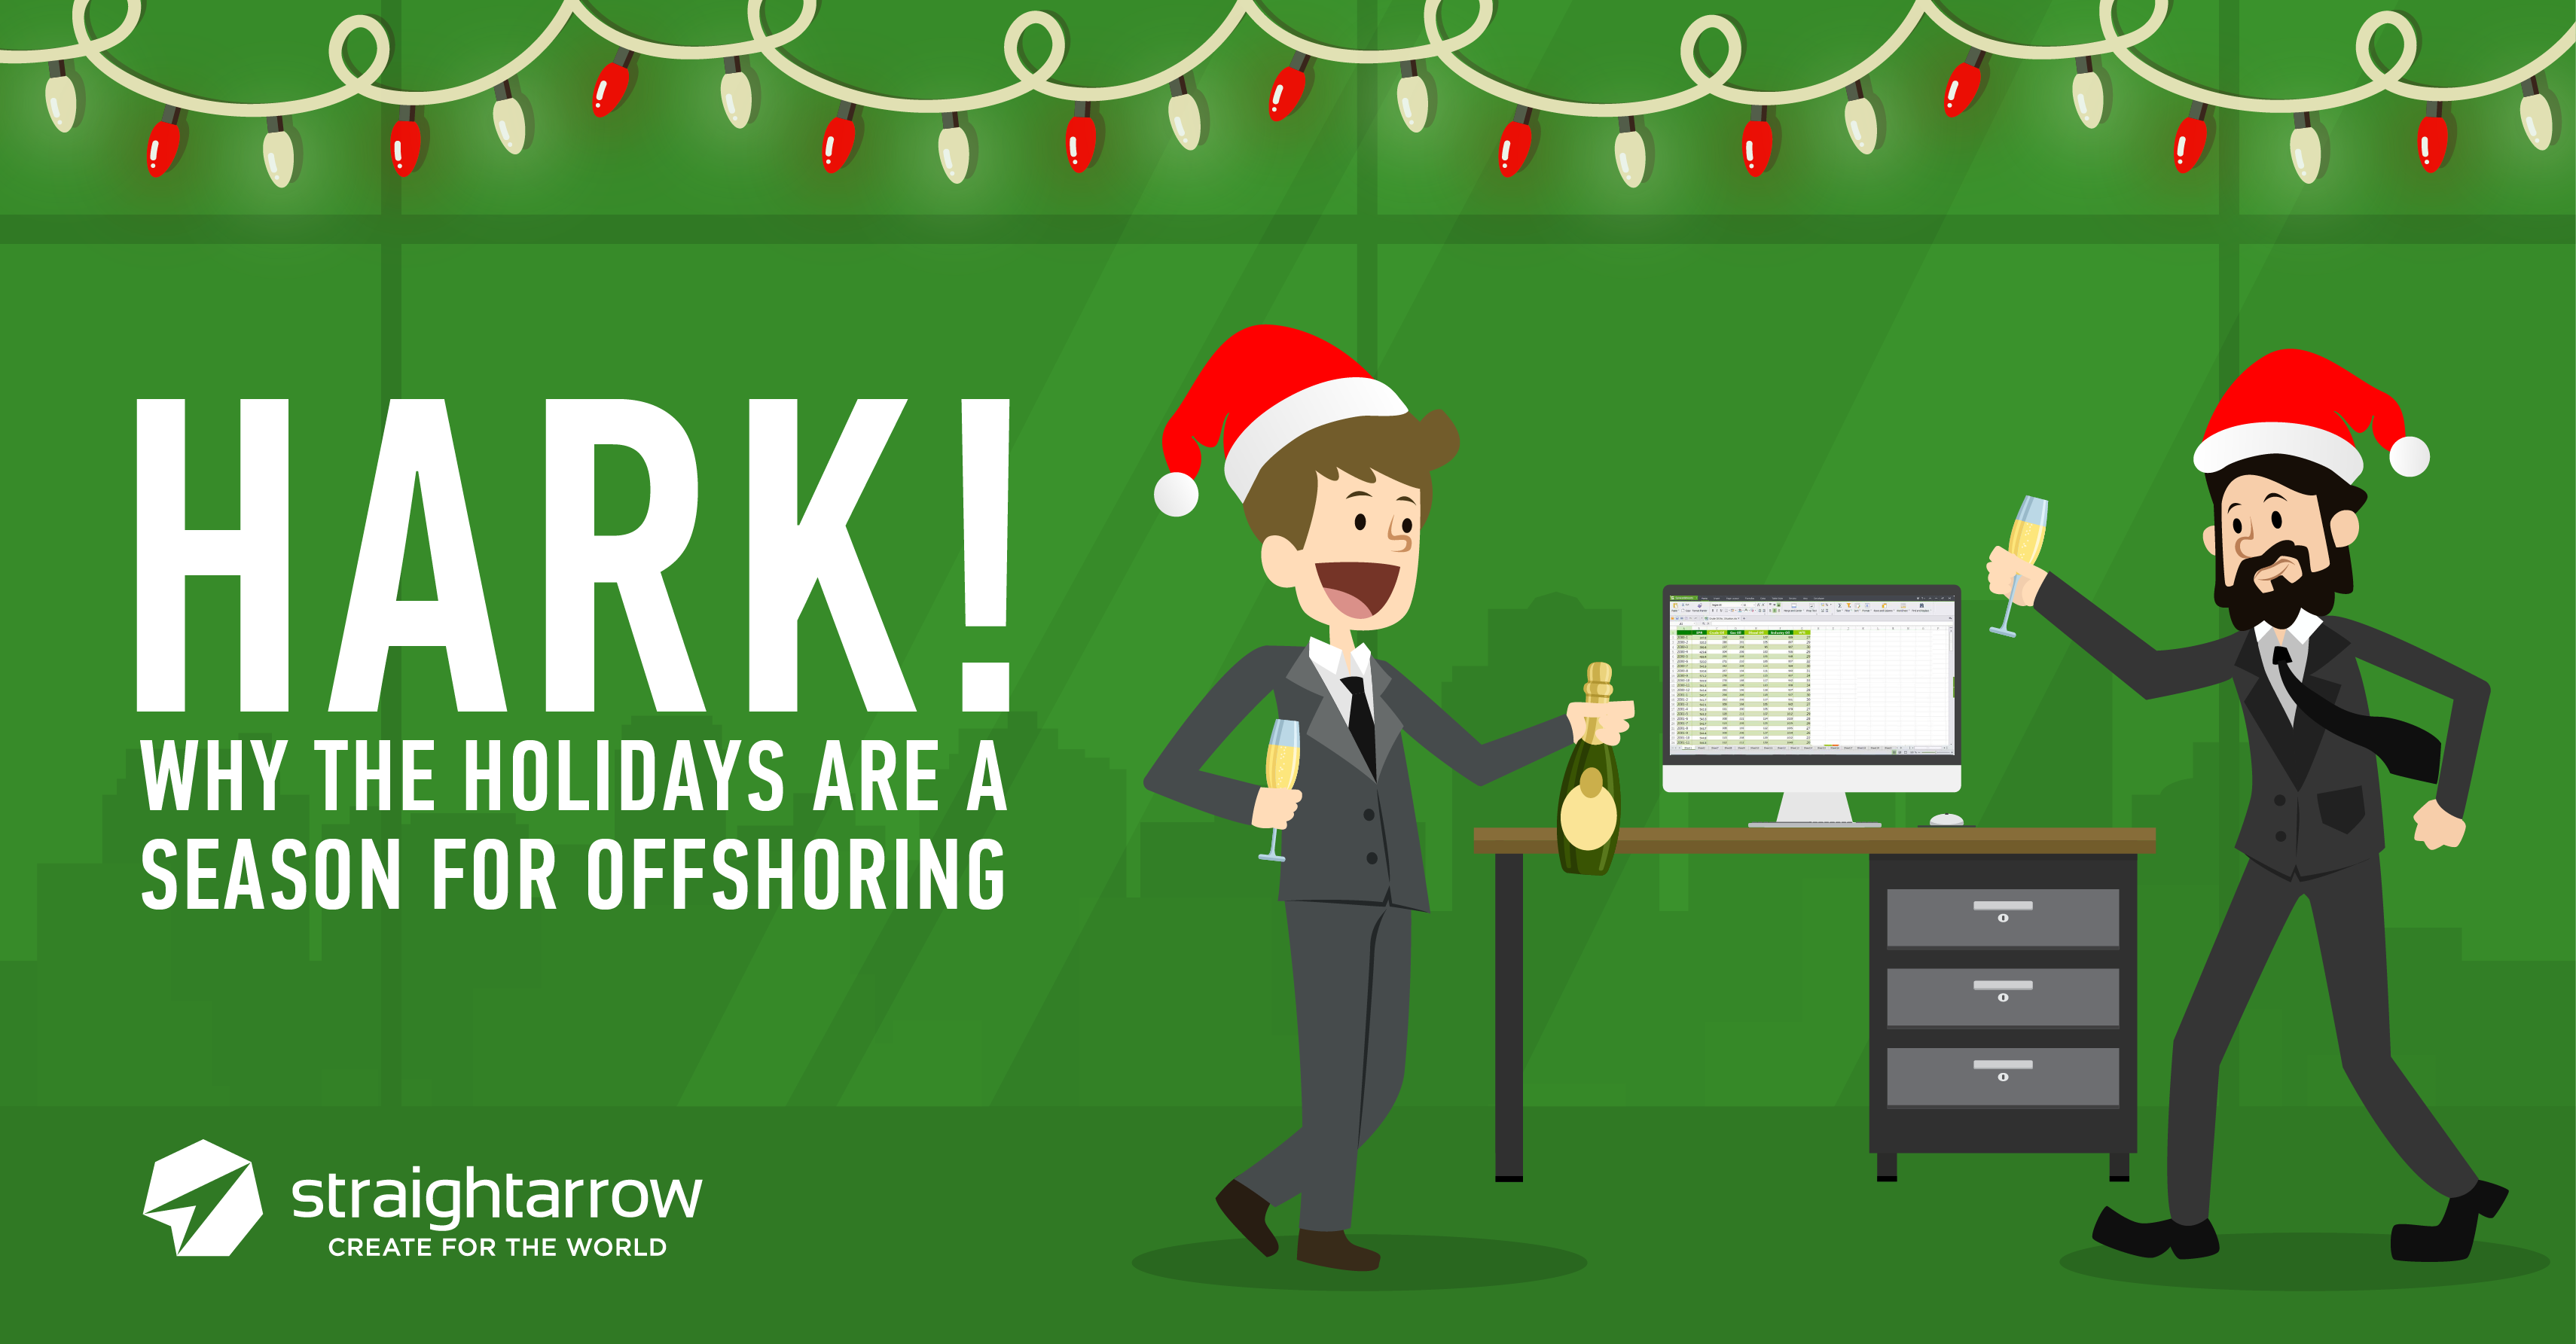 Hark! Why the Holidays Are a Season for Offshoring